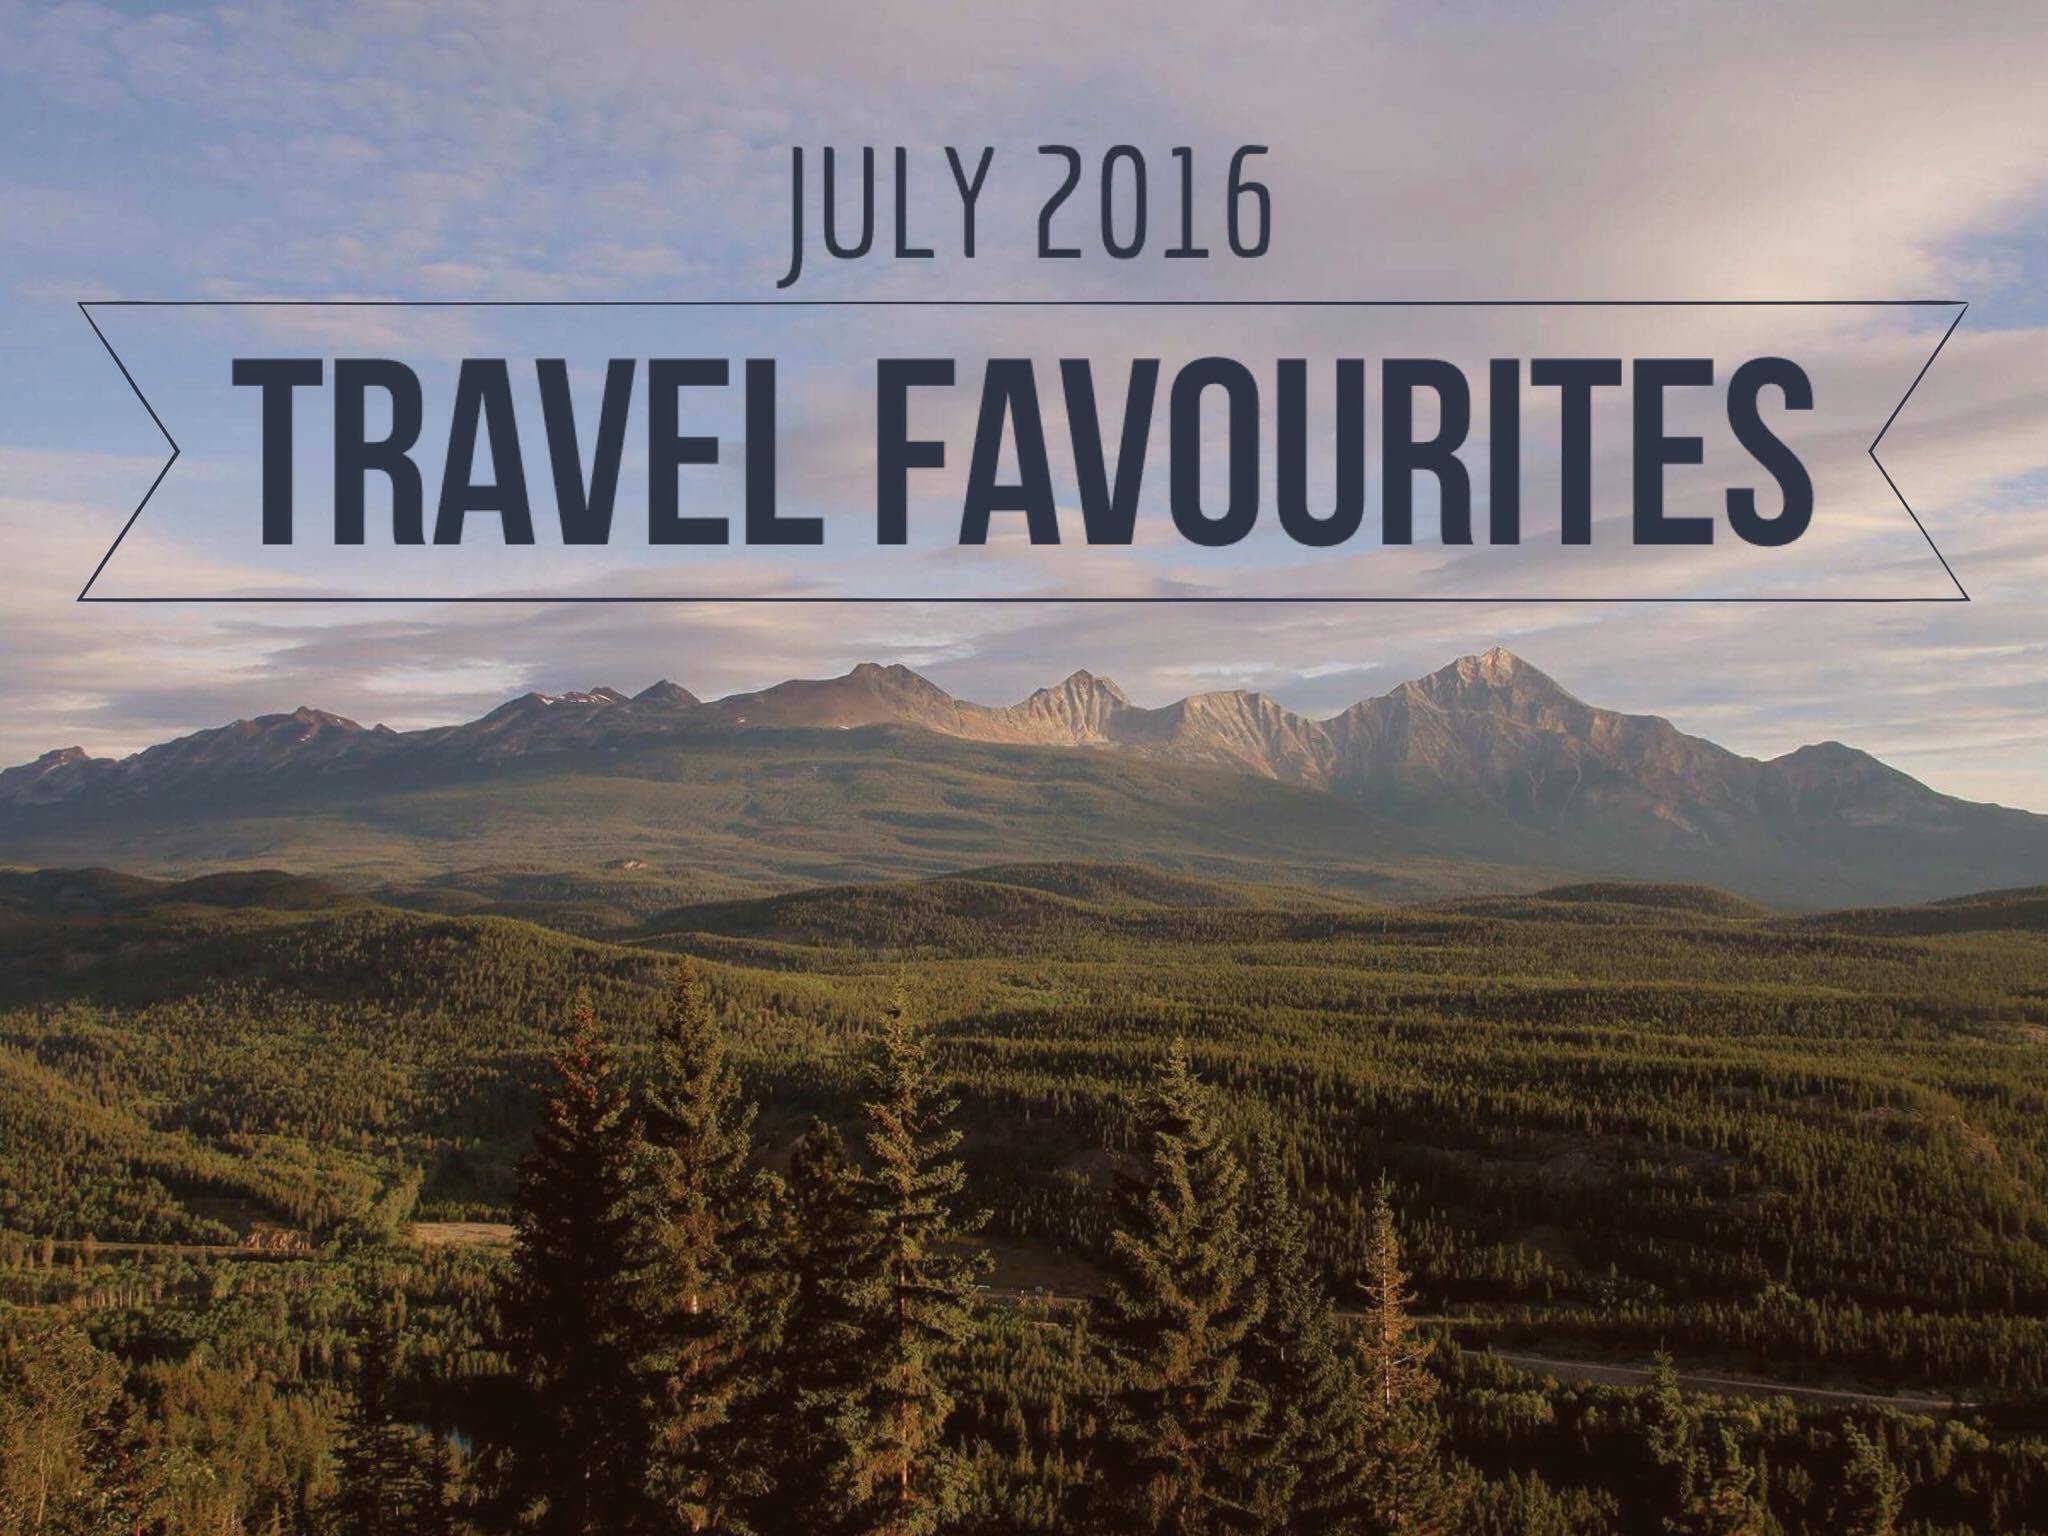 July 2016 Travel Favourites